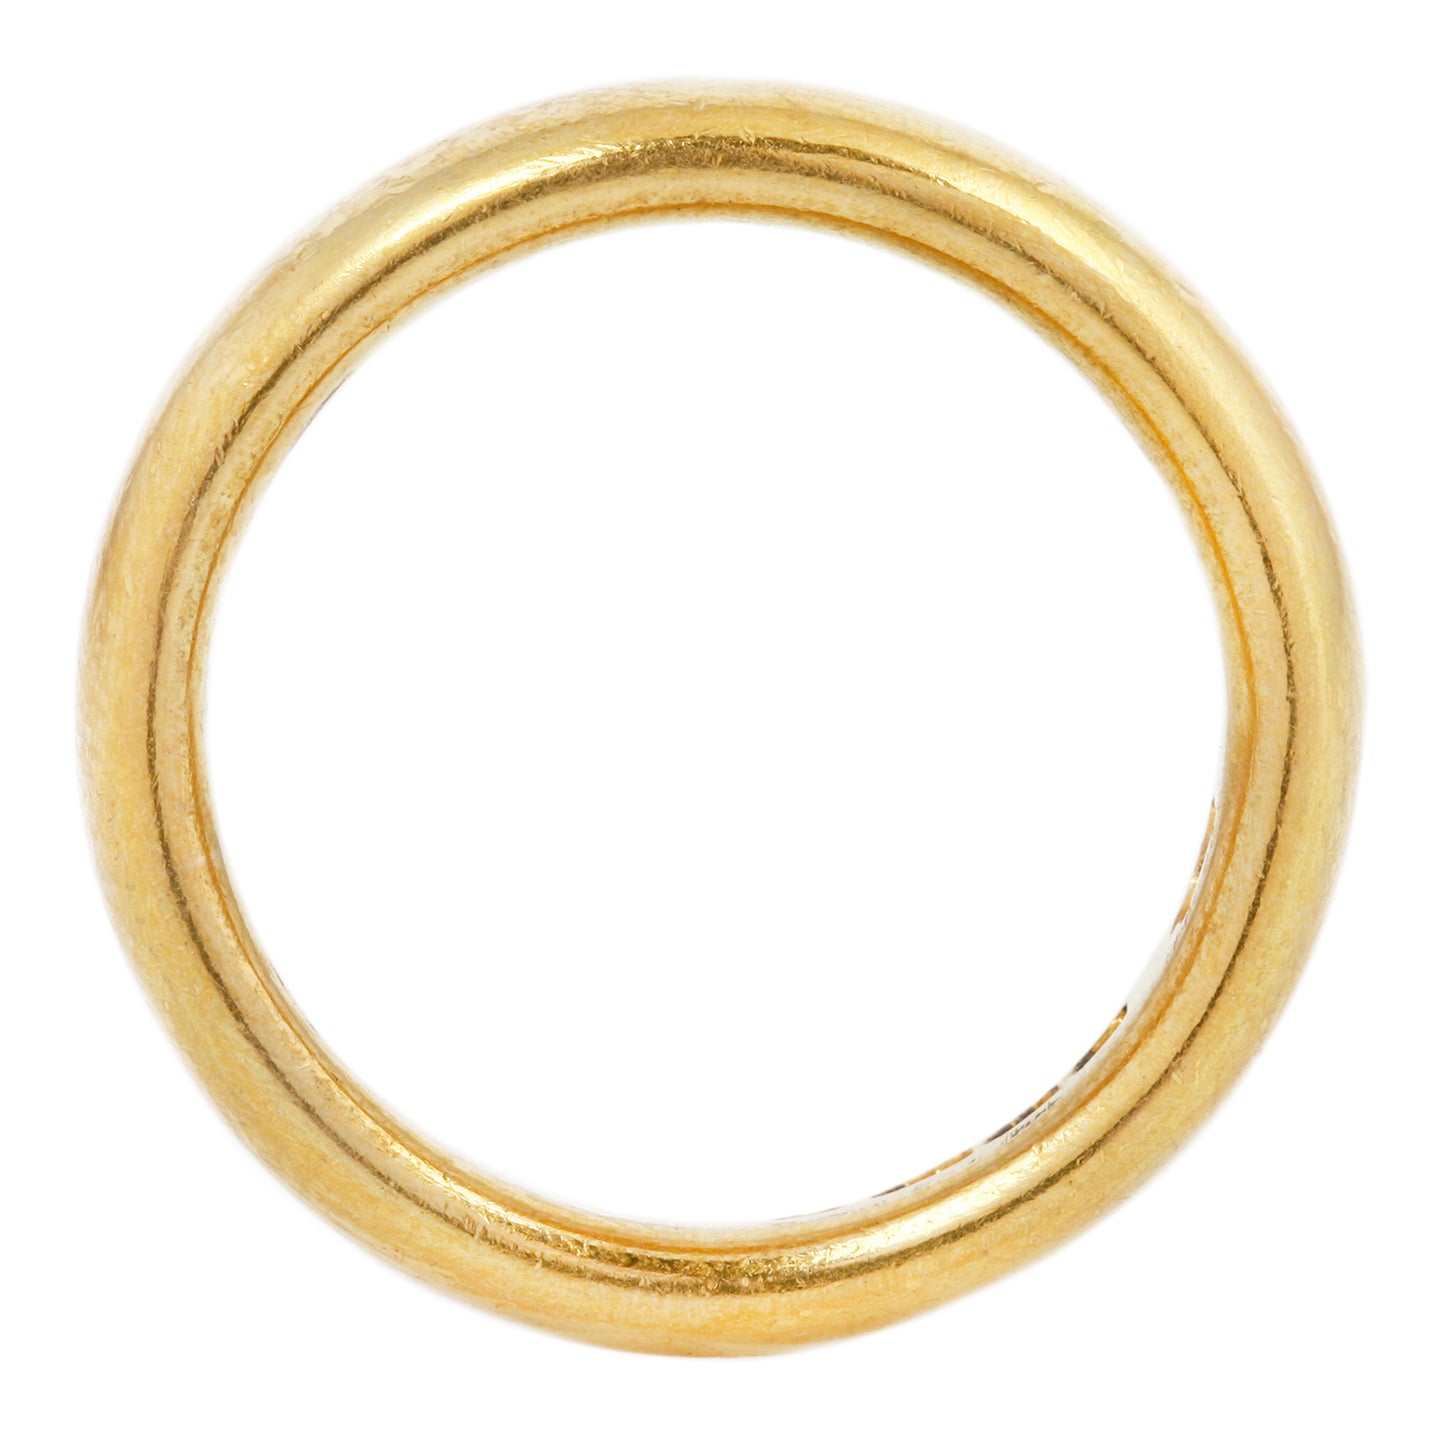 Regal Gold Dome Band